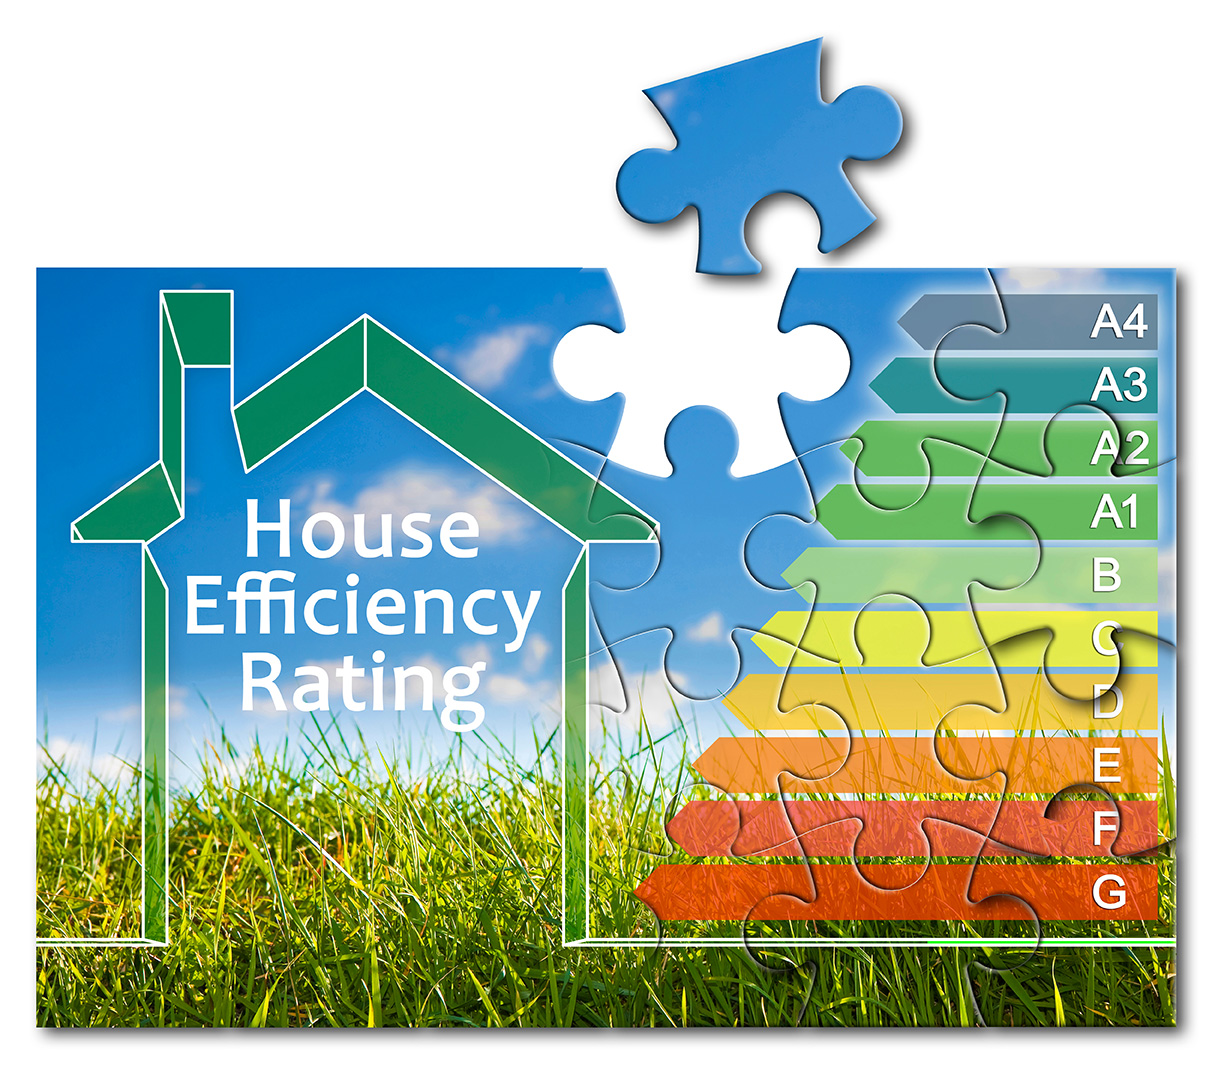 Buildings-energy-efficiency-and-Rating-concept-with-energy-certification-classes-according-to-the-new-European-law